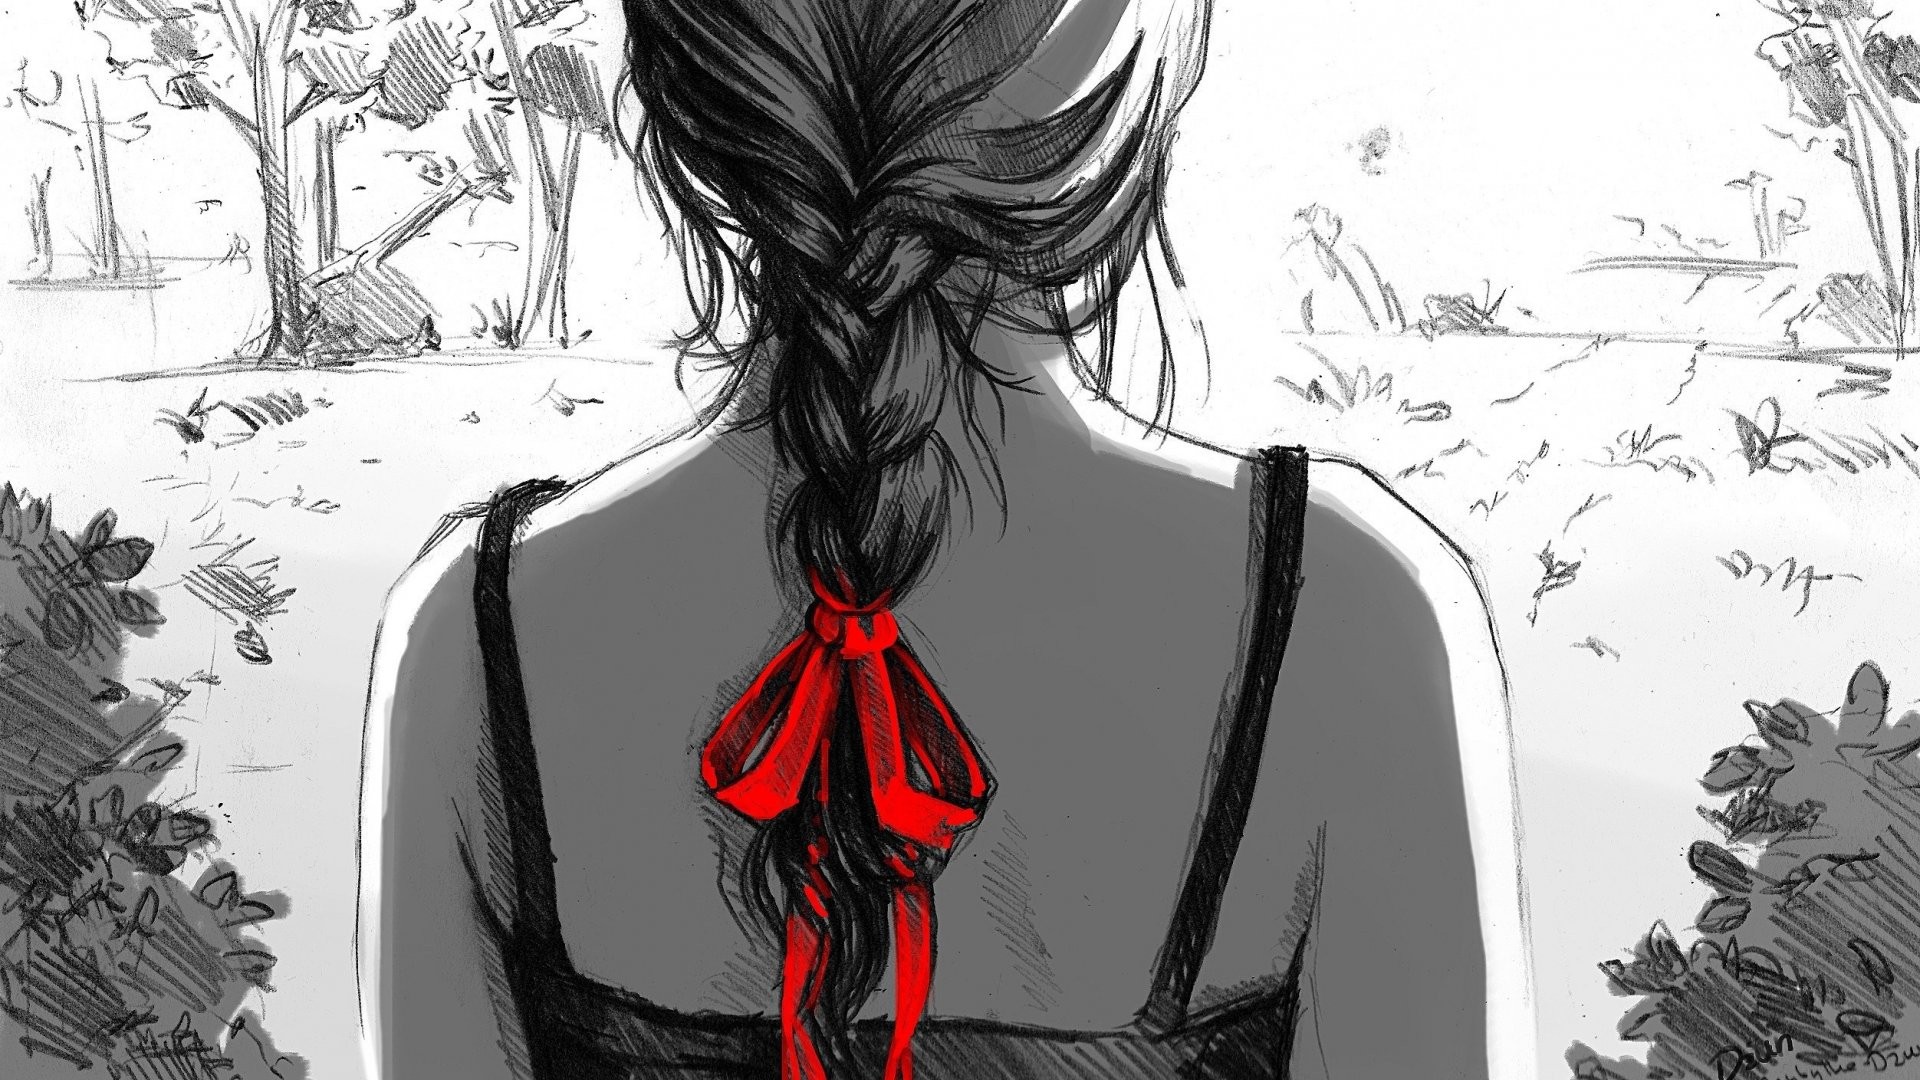 Anime 1920x1080 selective coloring artwork red ribbon women back women outdoors sketches